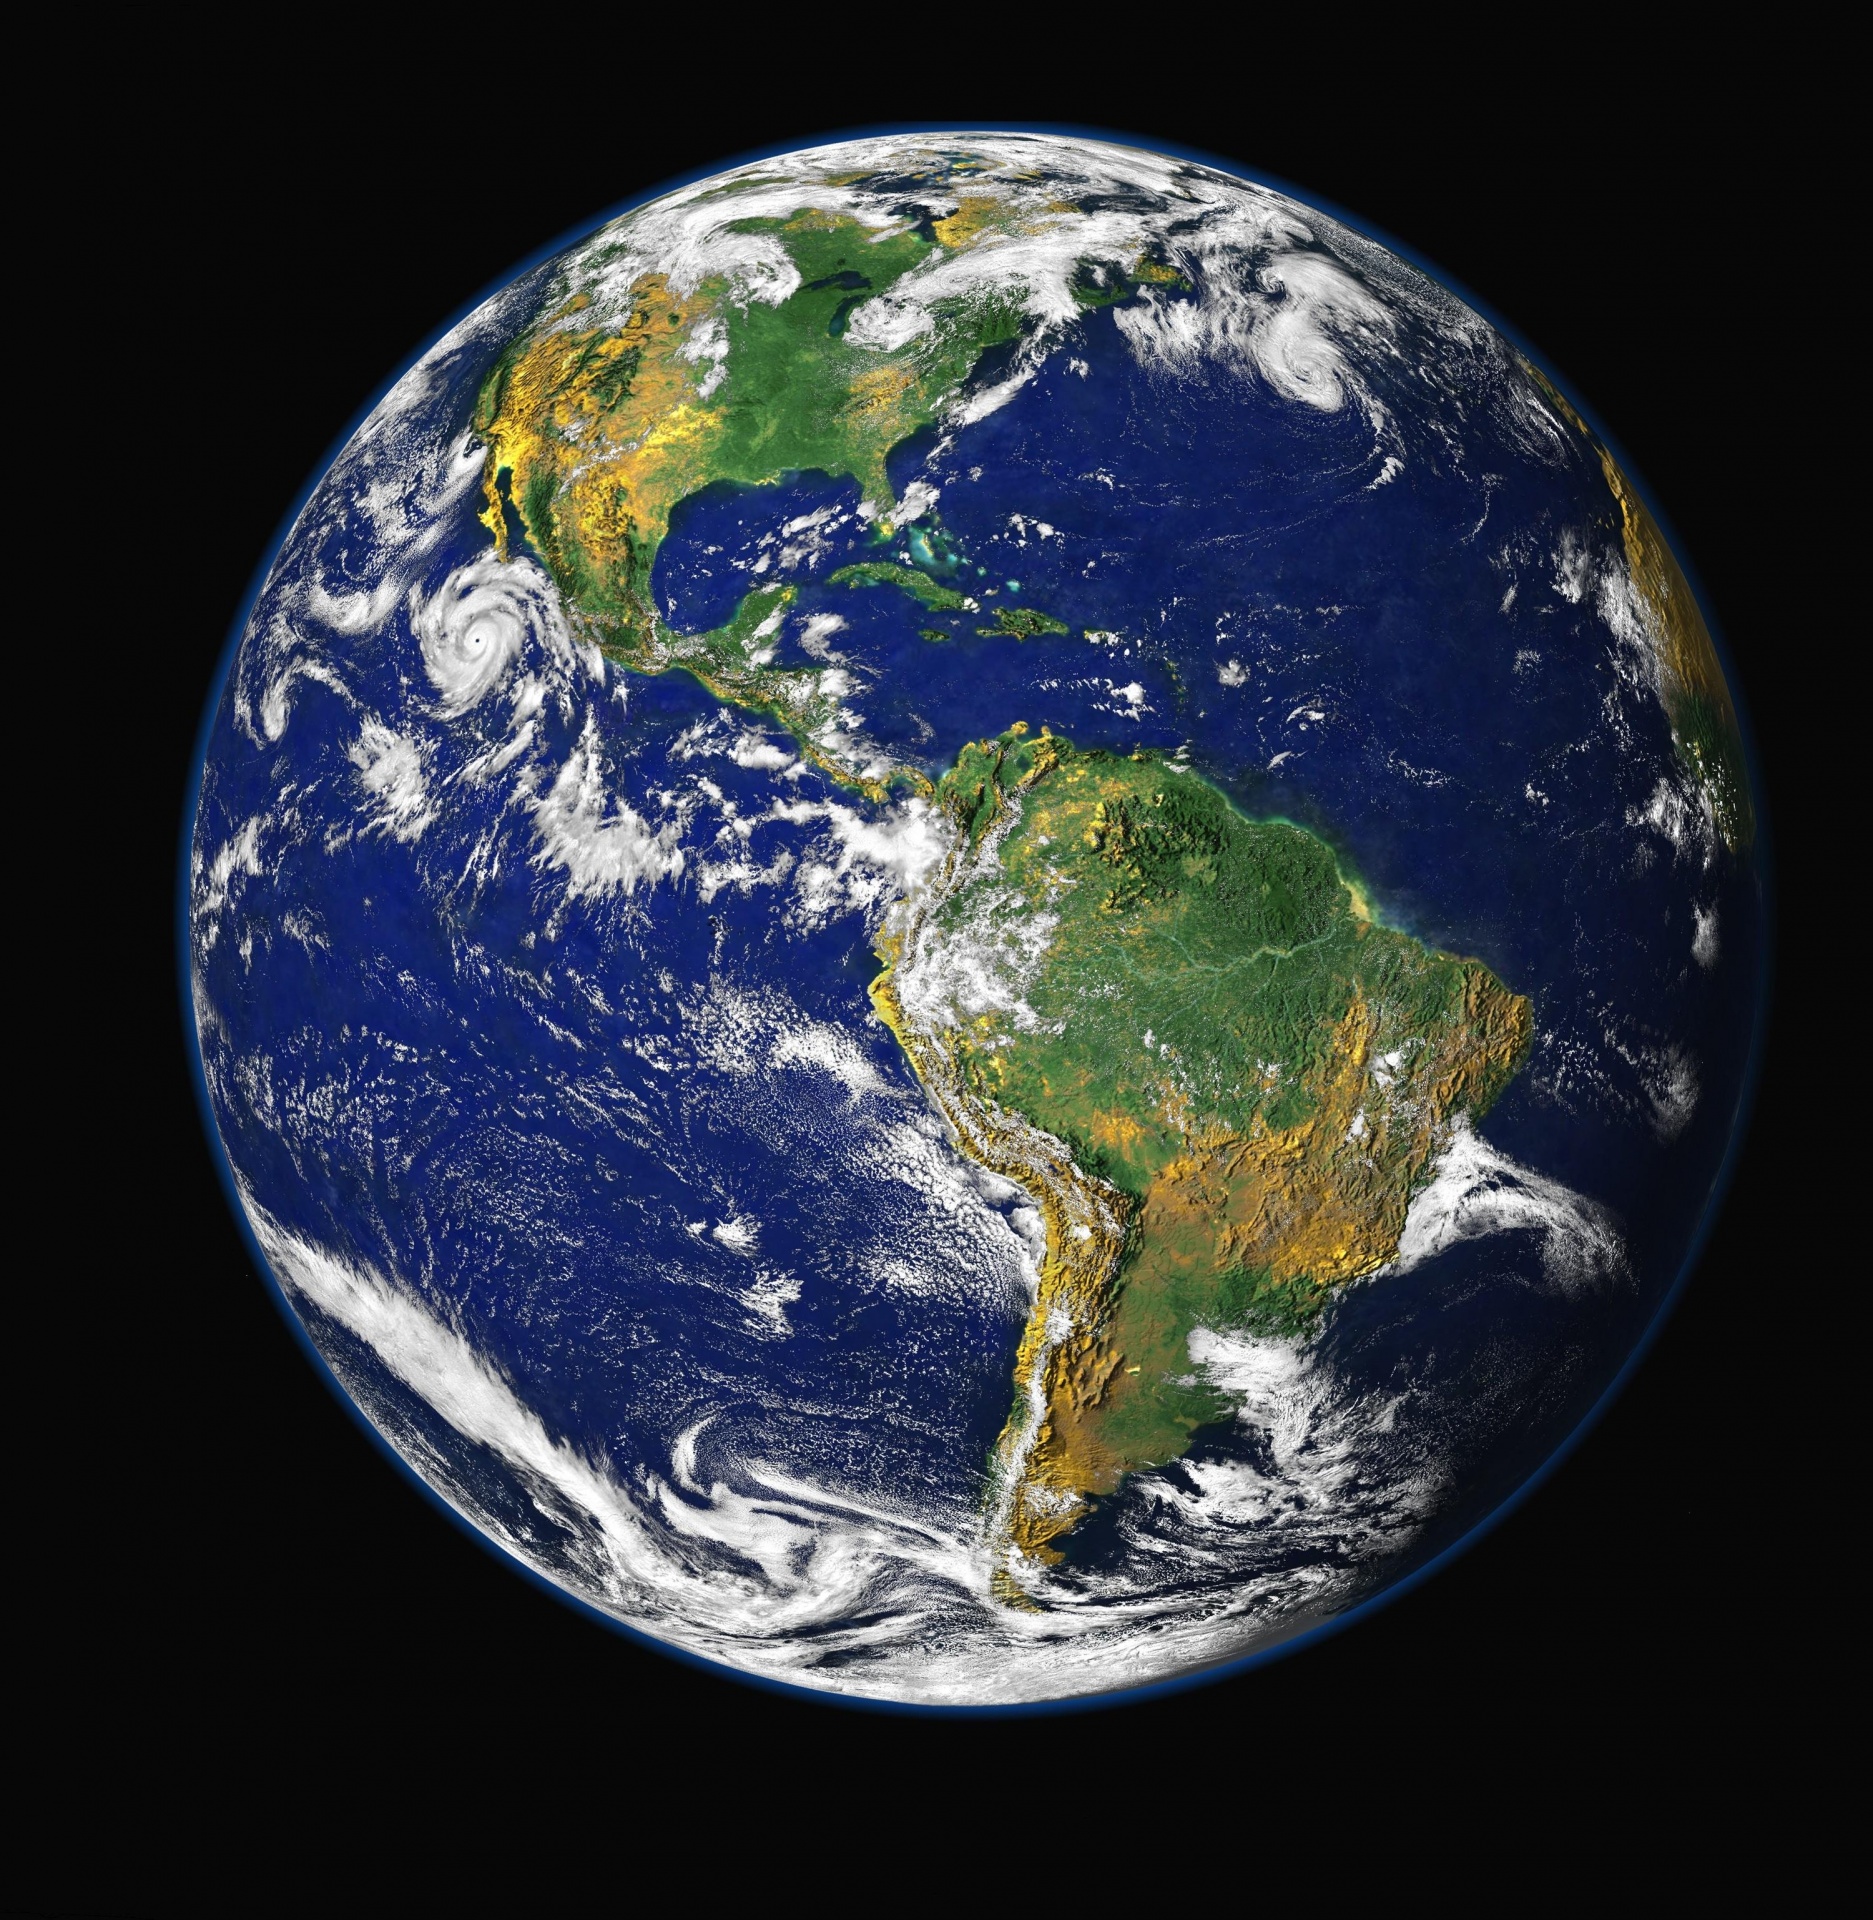 Albums 104+ Images a picture of the planet earth Full HD, 2k, 4k